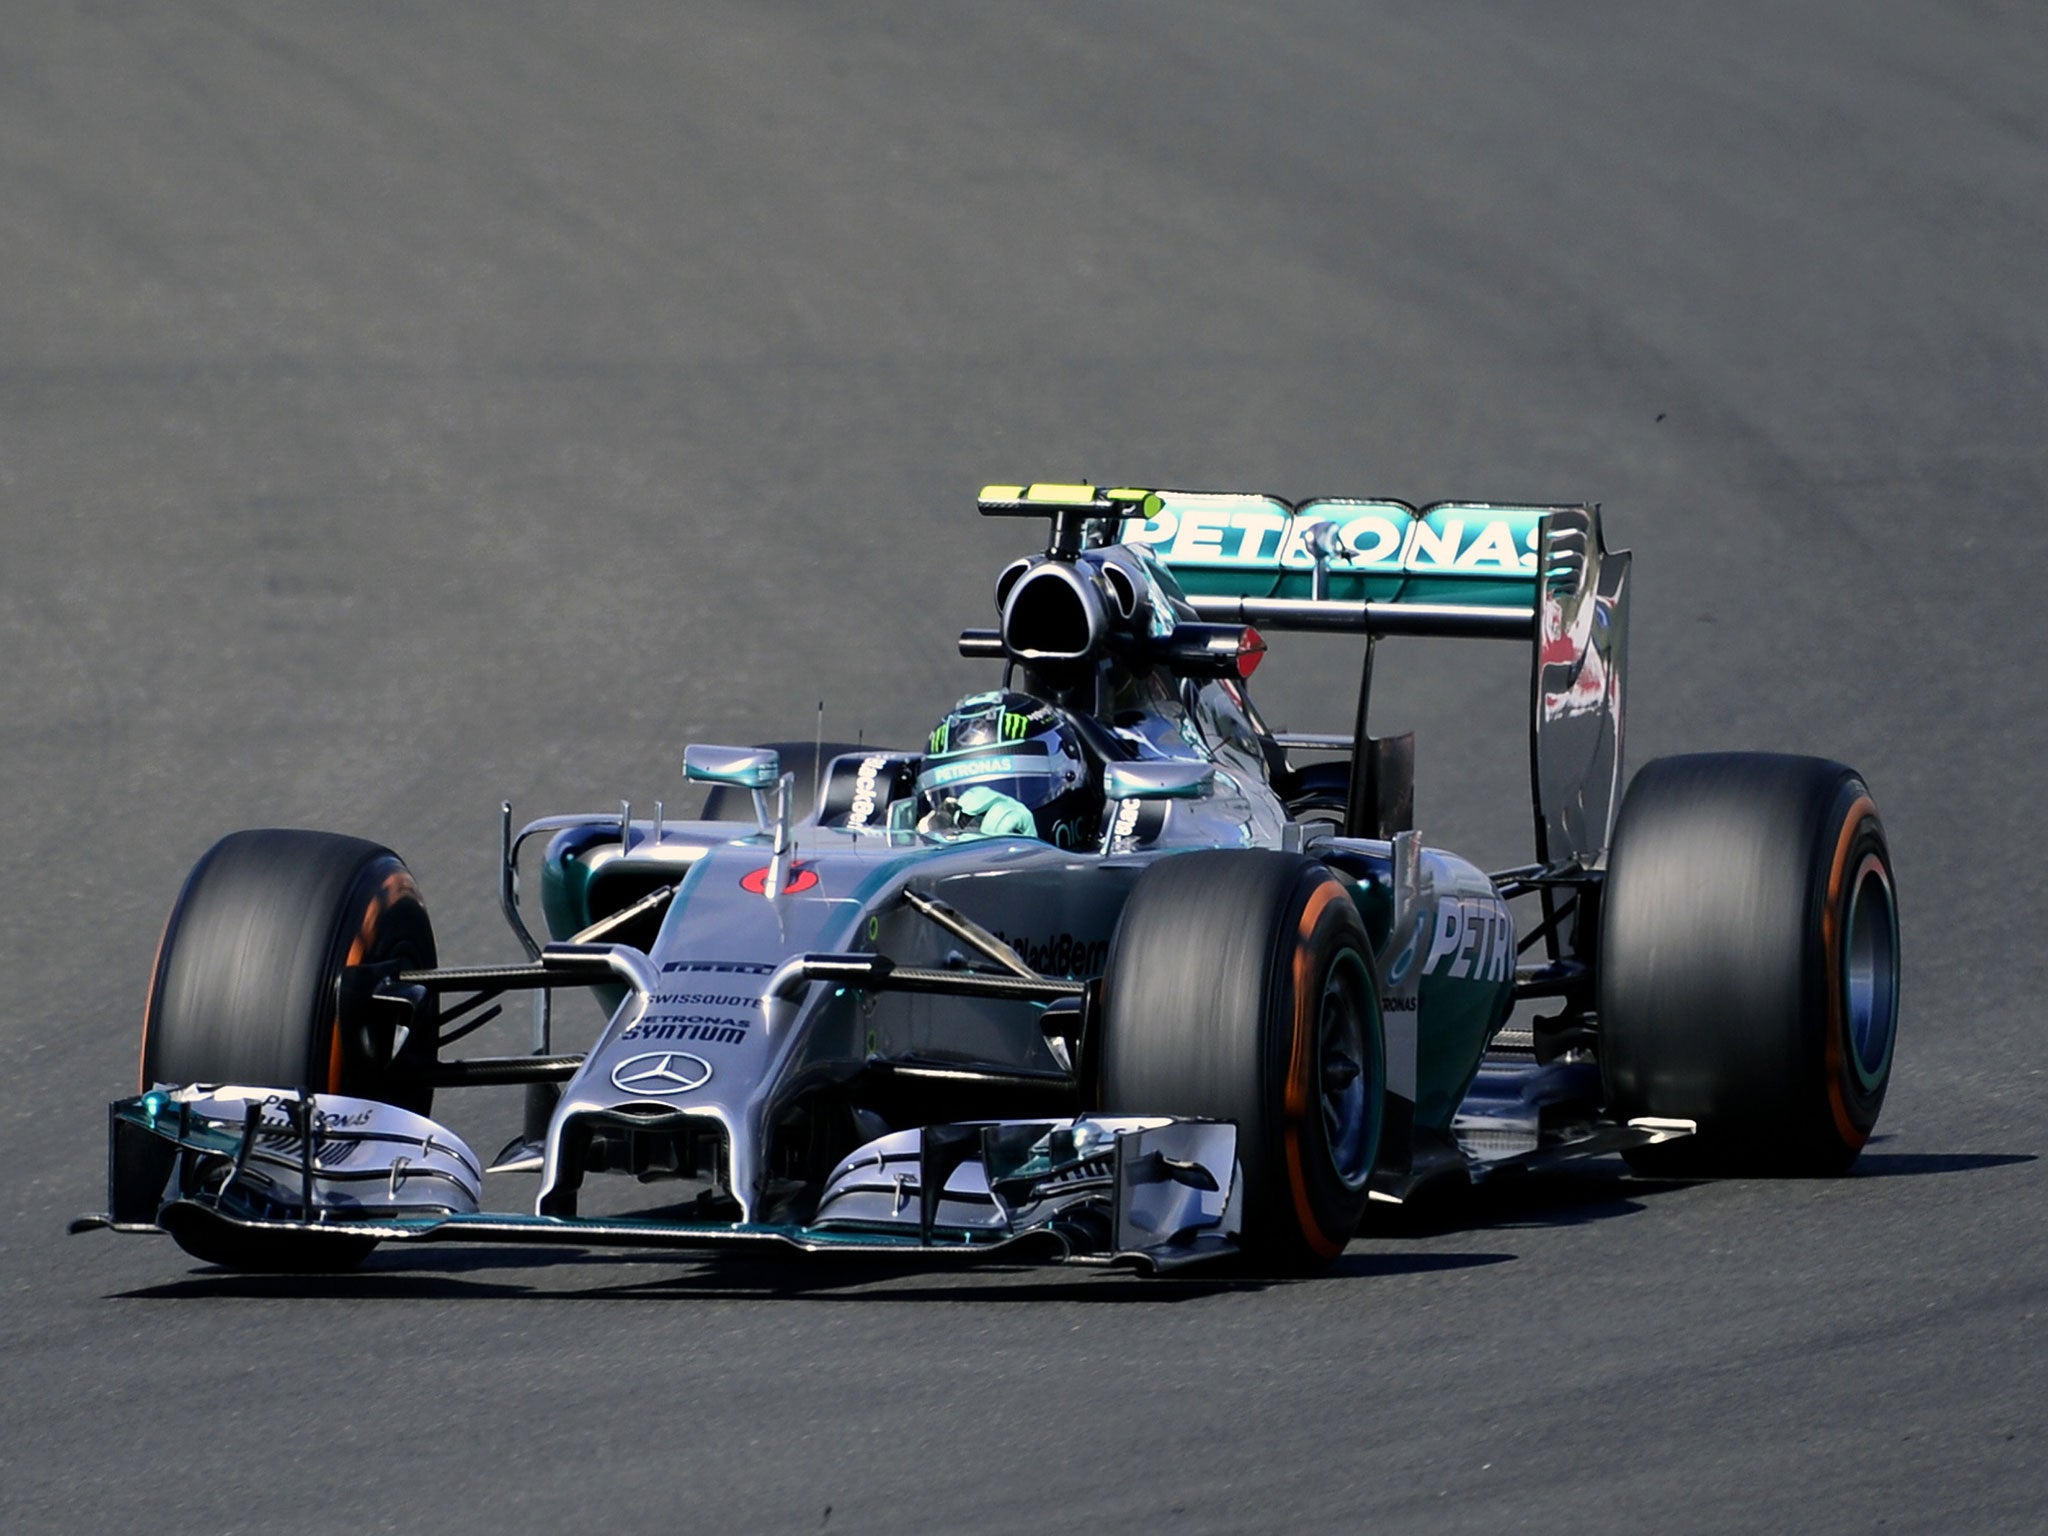 World Championship leader Nico Rosberg was the fastest in practice